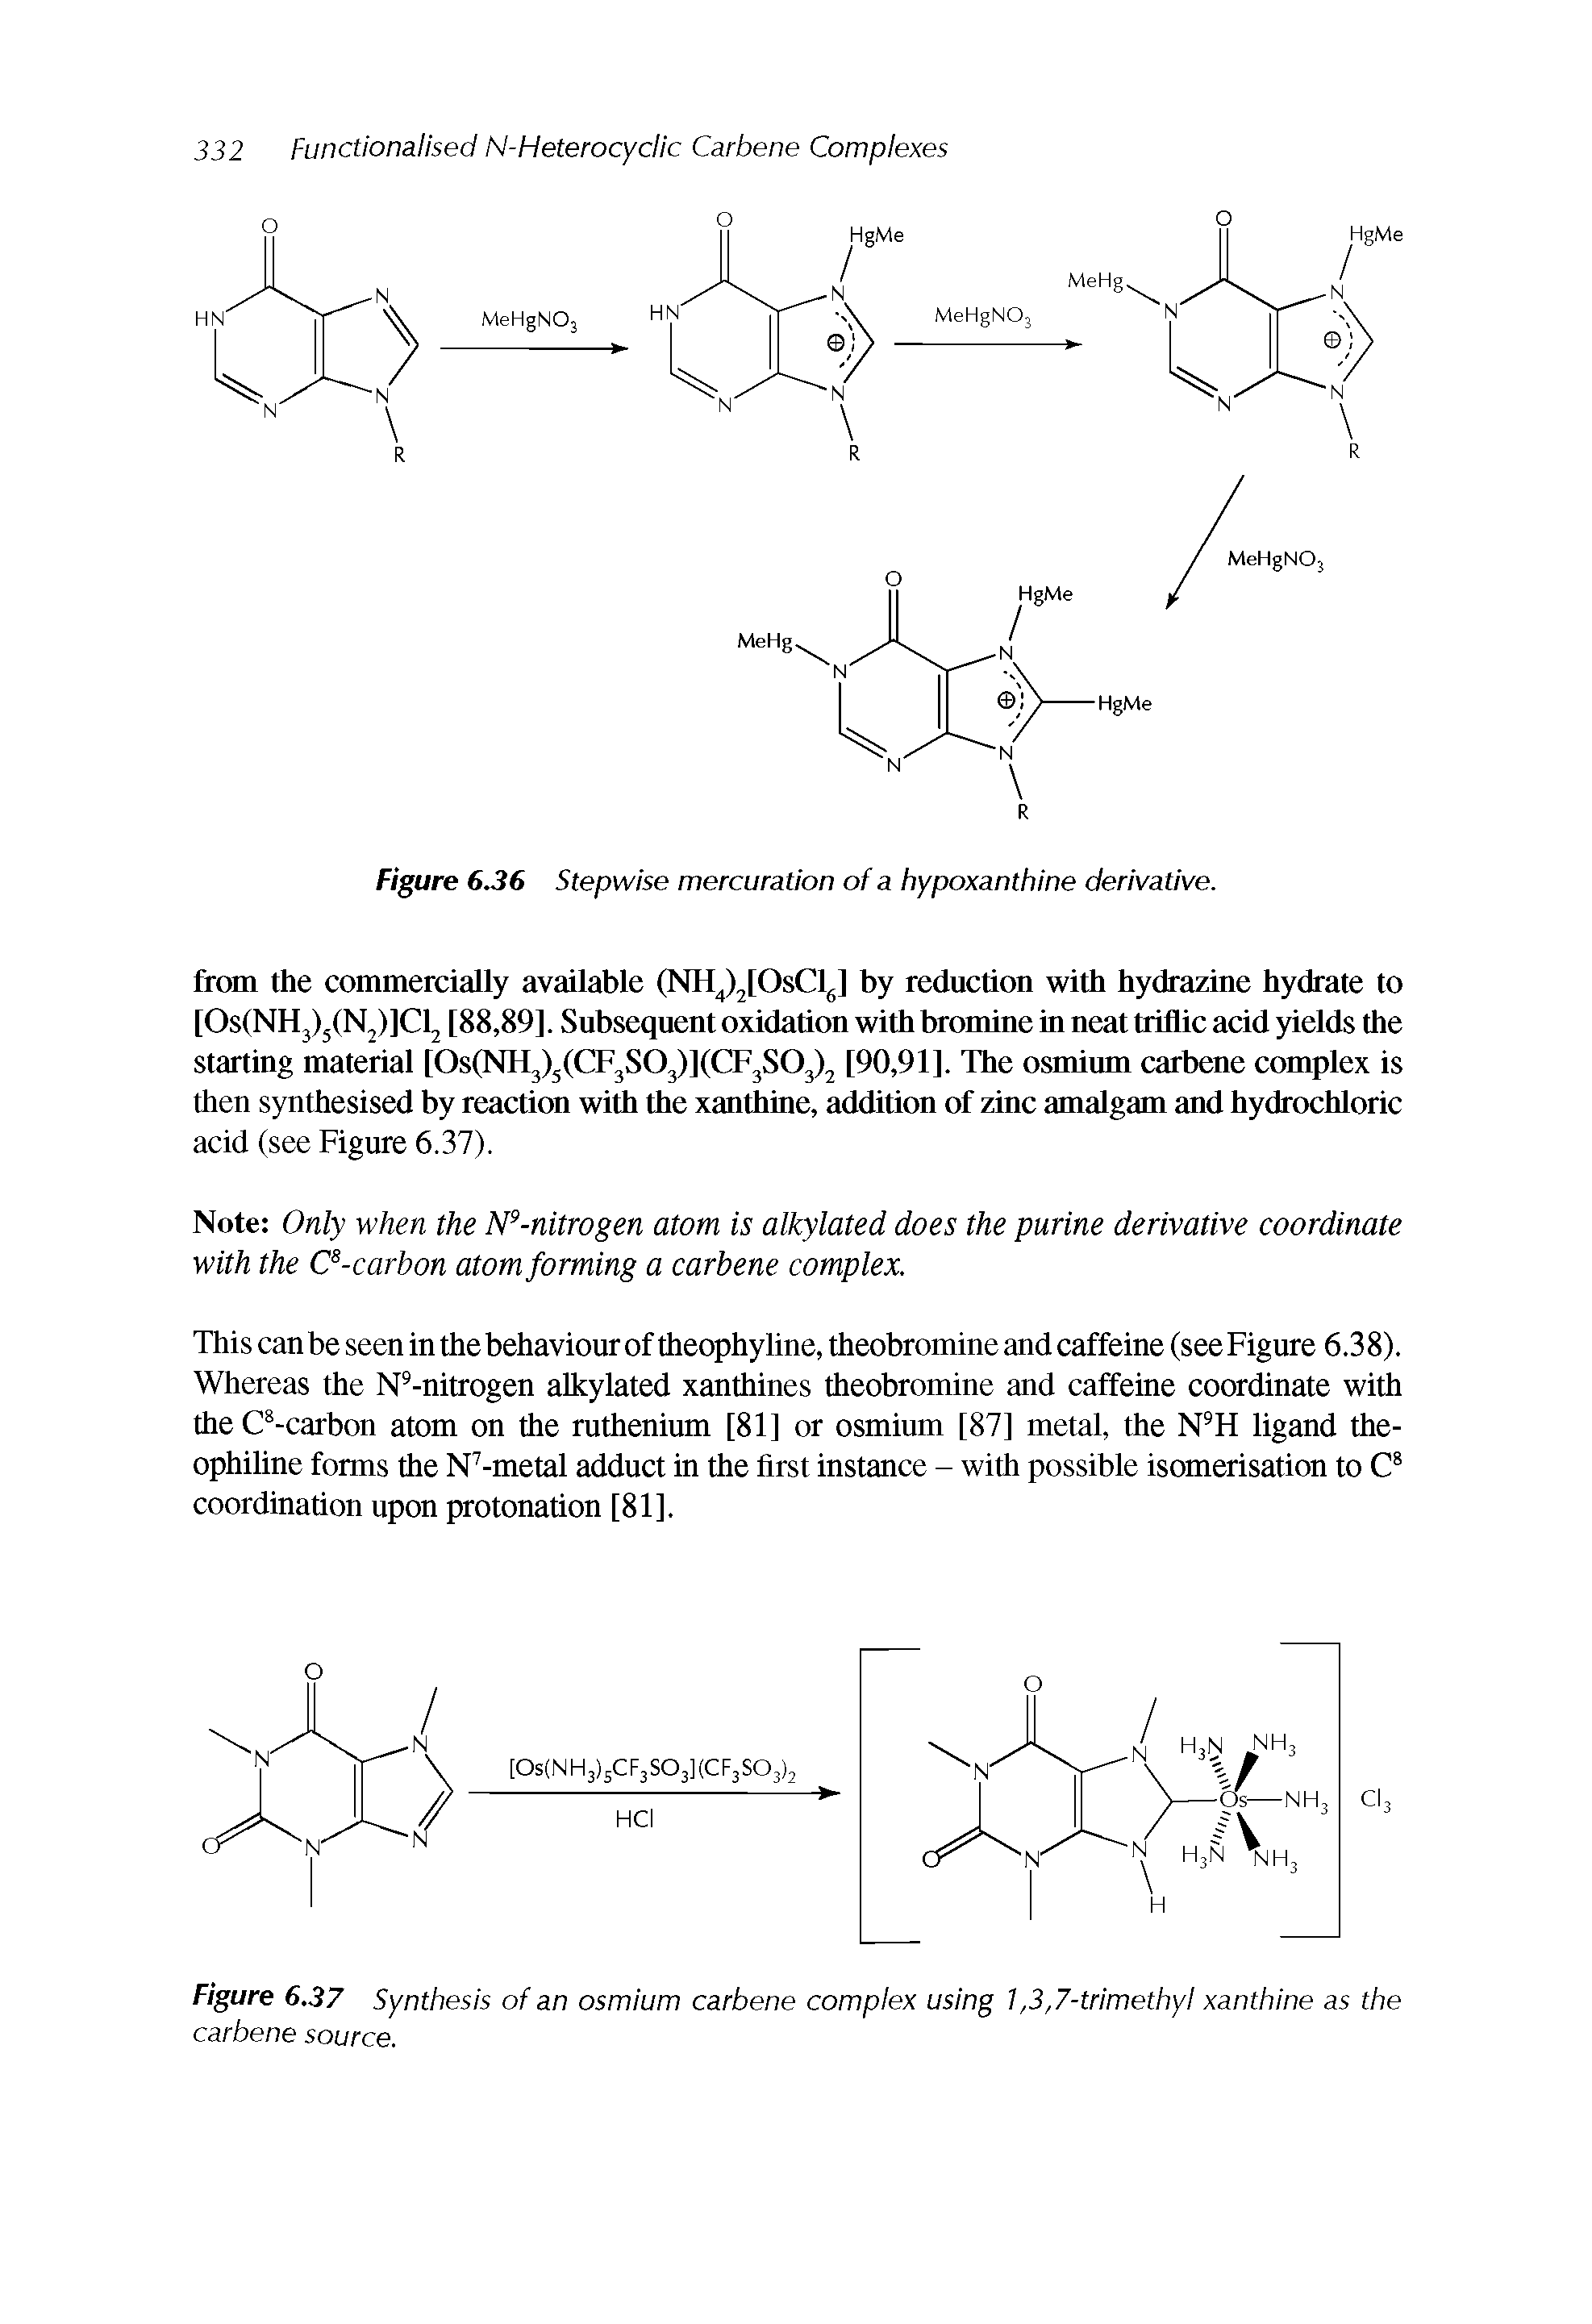 Figure 6.37 Synthesis of an osmium carbene complex using 1,3,7-trimethyl xanthine as the...